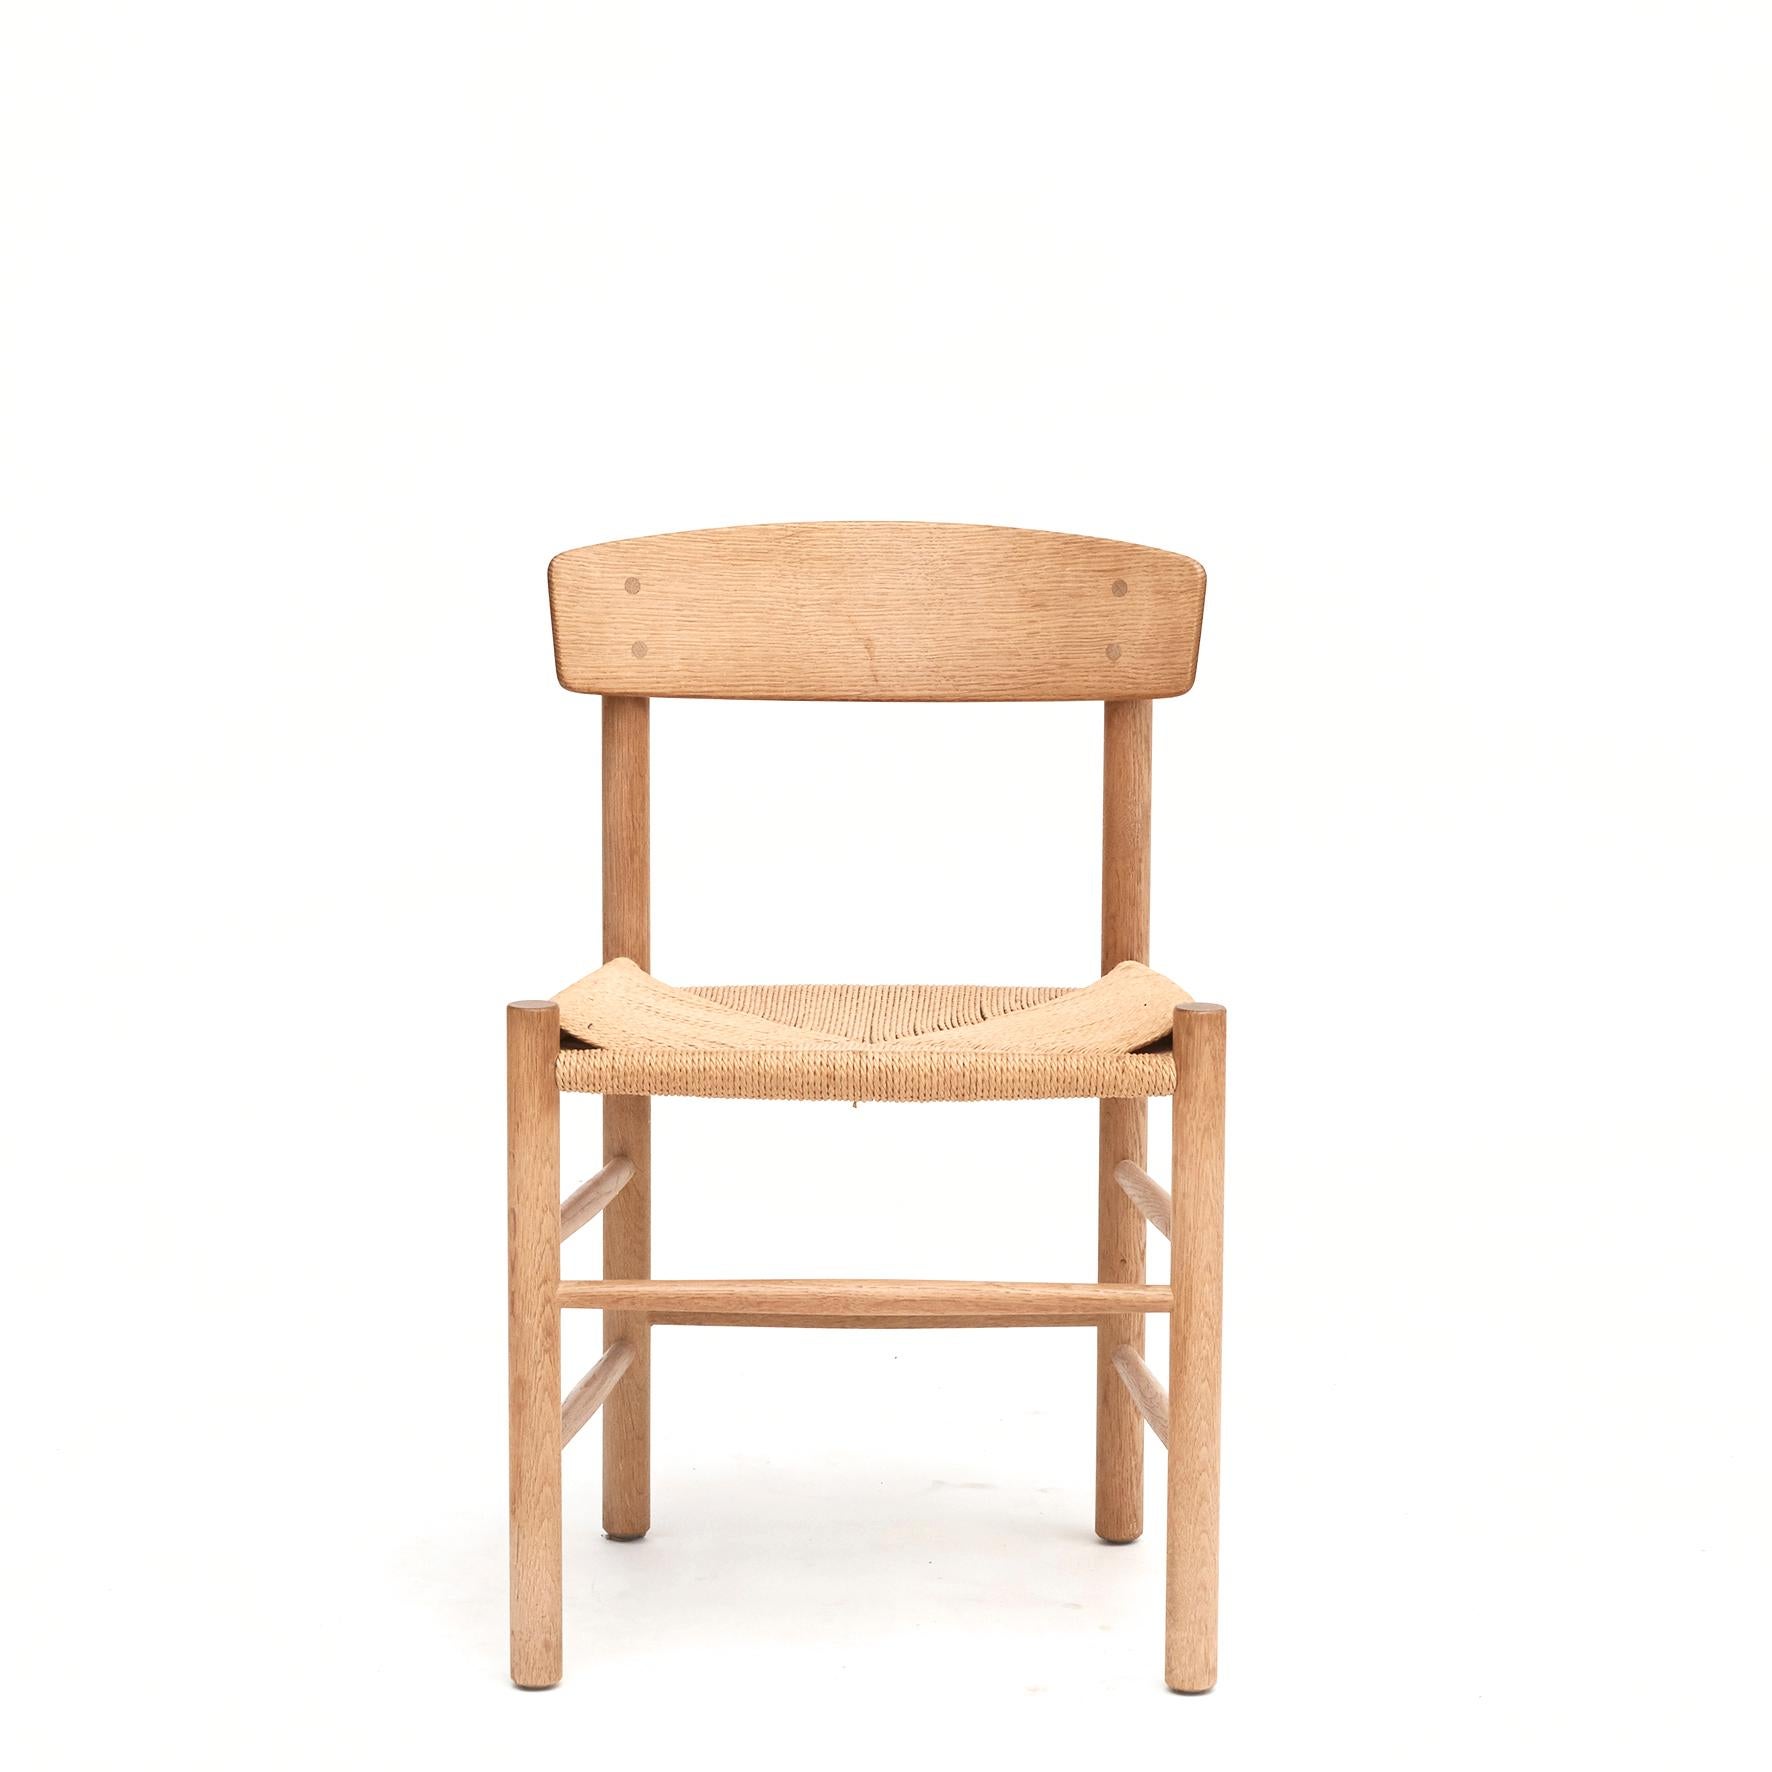 Børge Mogensen 1914-1972:
Set of 4 Shaker dining chairs model J-39 by Børge Mogensen for FDB Mobler.
Crafted from solid oak wood and features a handwoven seat in natural paper cord.
Designed by Børge Mogensen in 1947, manufactured by FDB Mobler